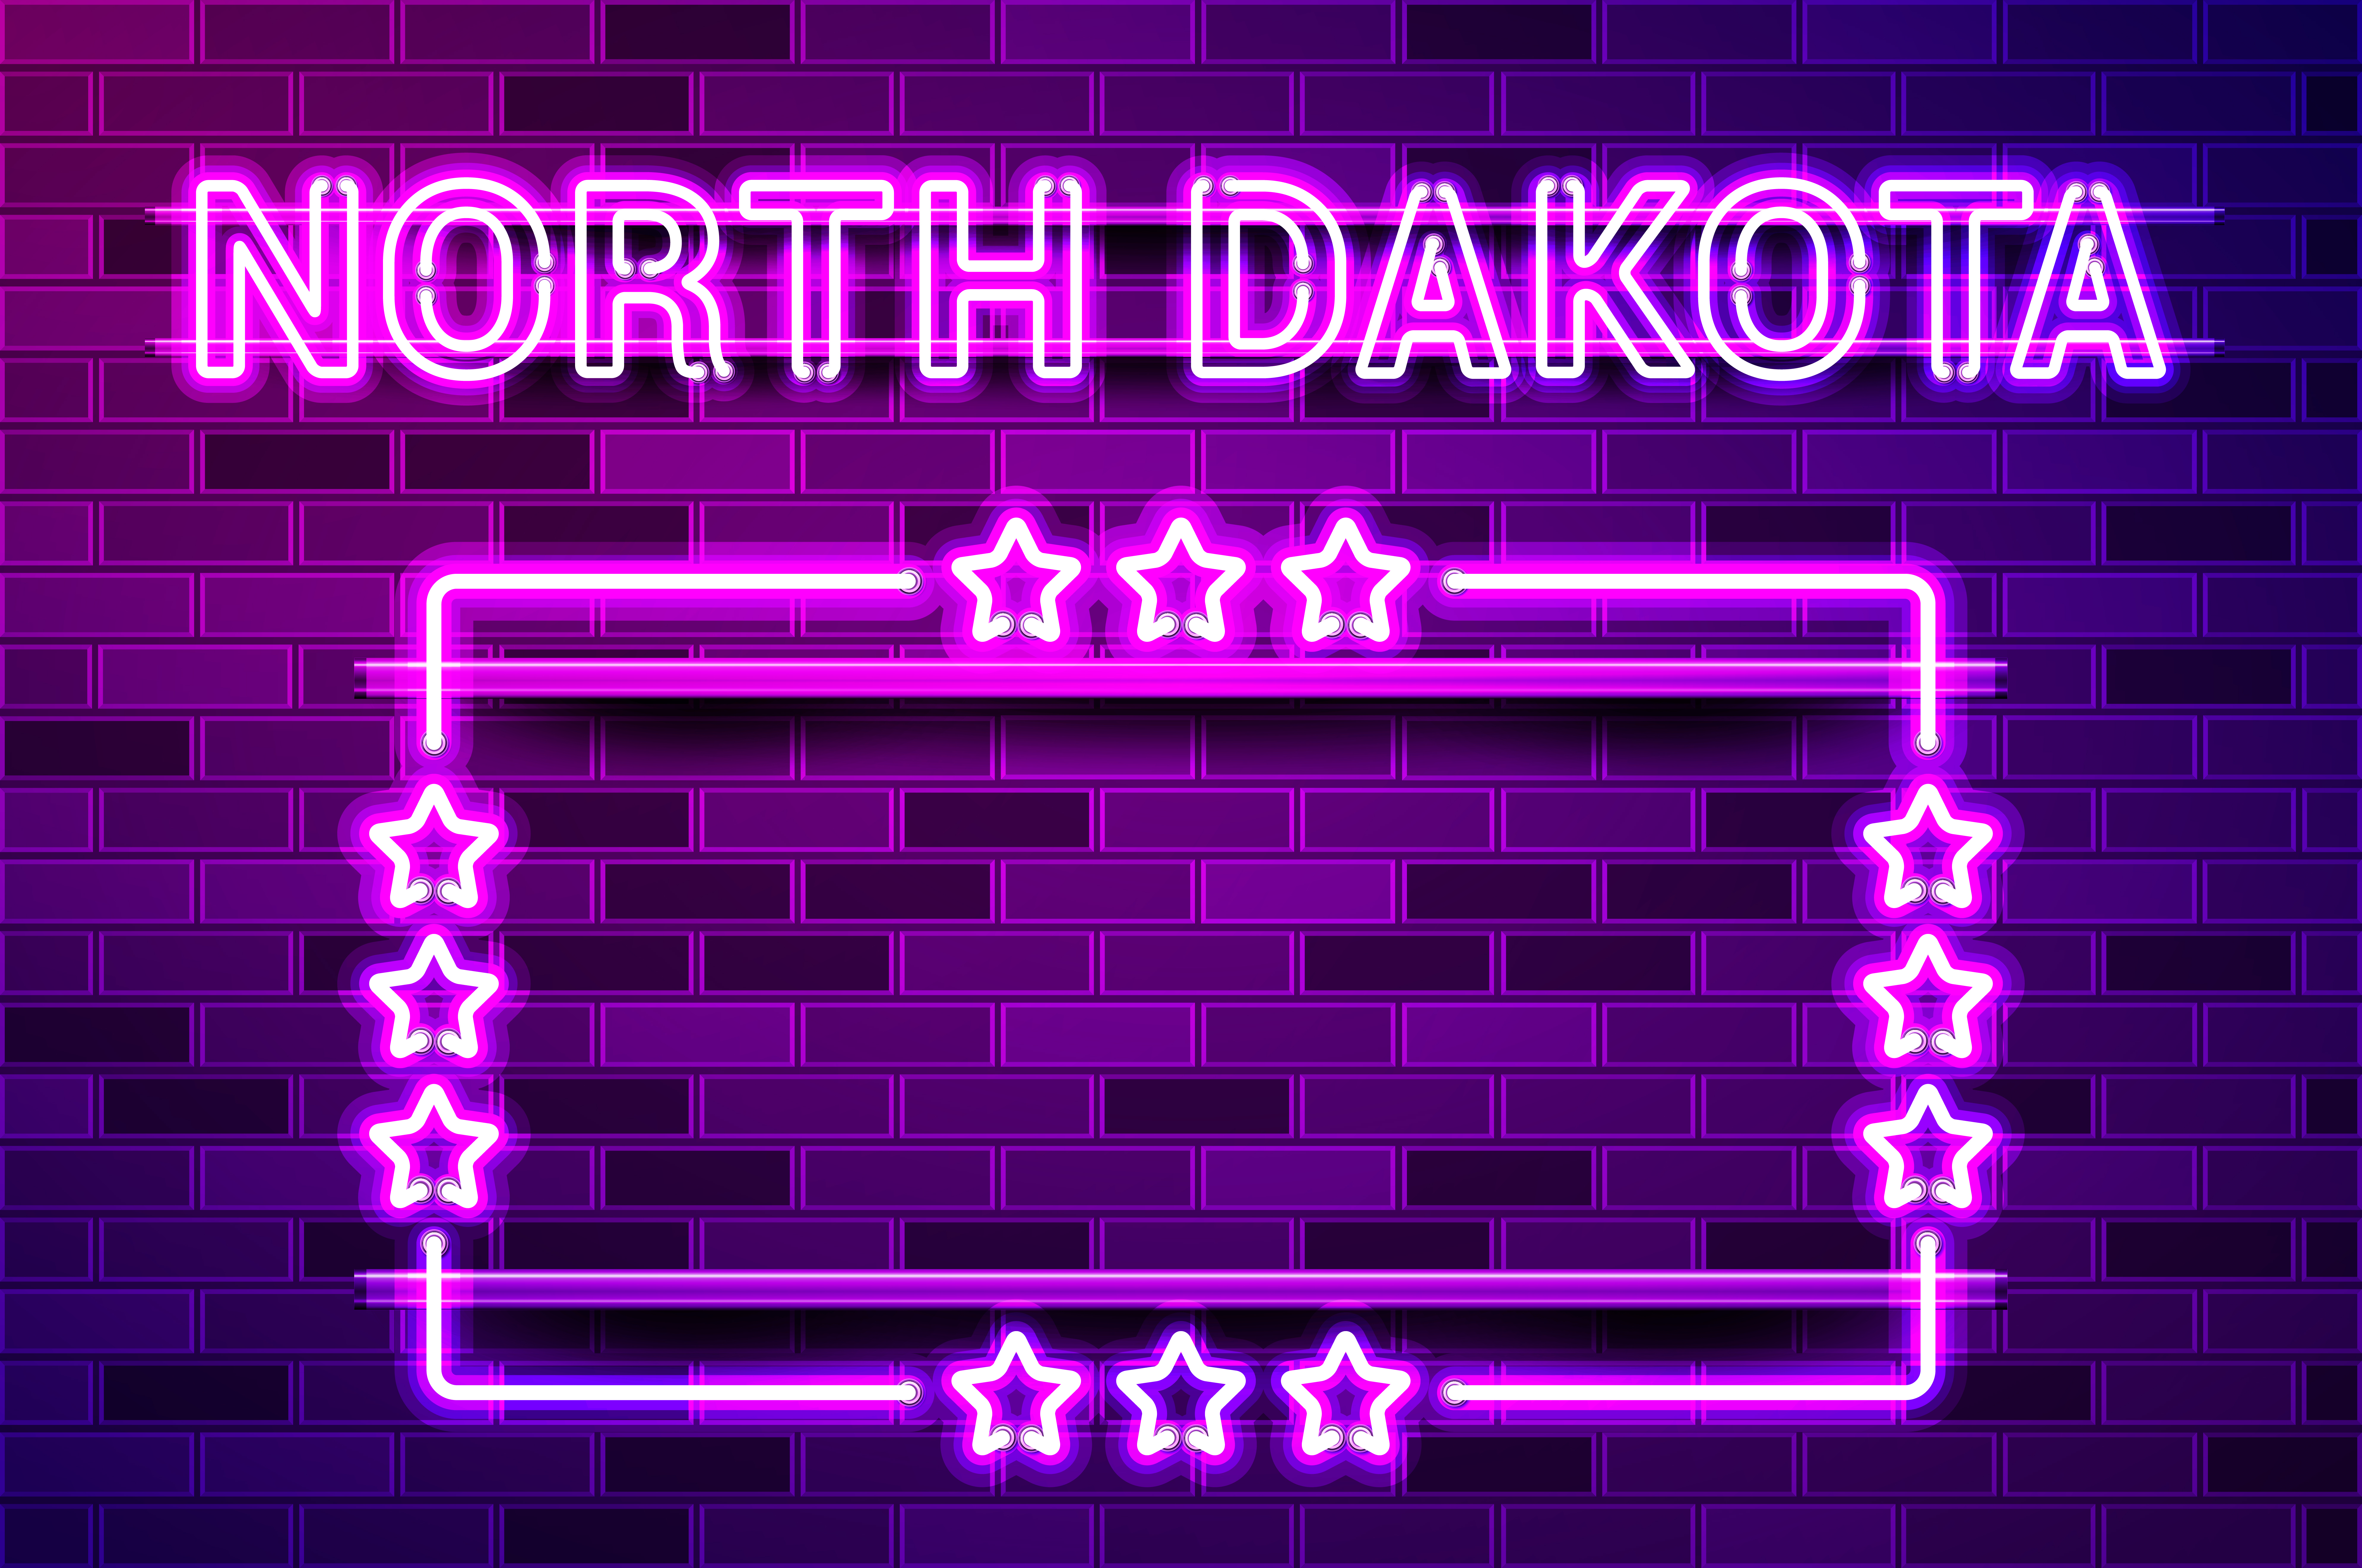 North Dakota US State glowing purple neon lettering and a rectangular frame with stars. Realistic vector illustration. Purple brick wall, violet glow, metal holders.. North Dakota US State glowing purple neon lettering and a rectangular frame with stars